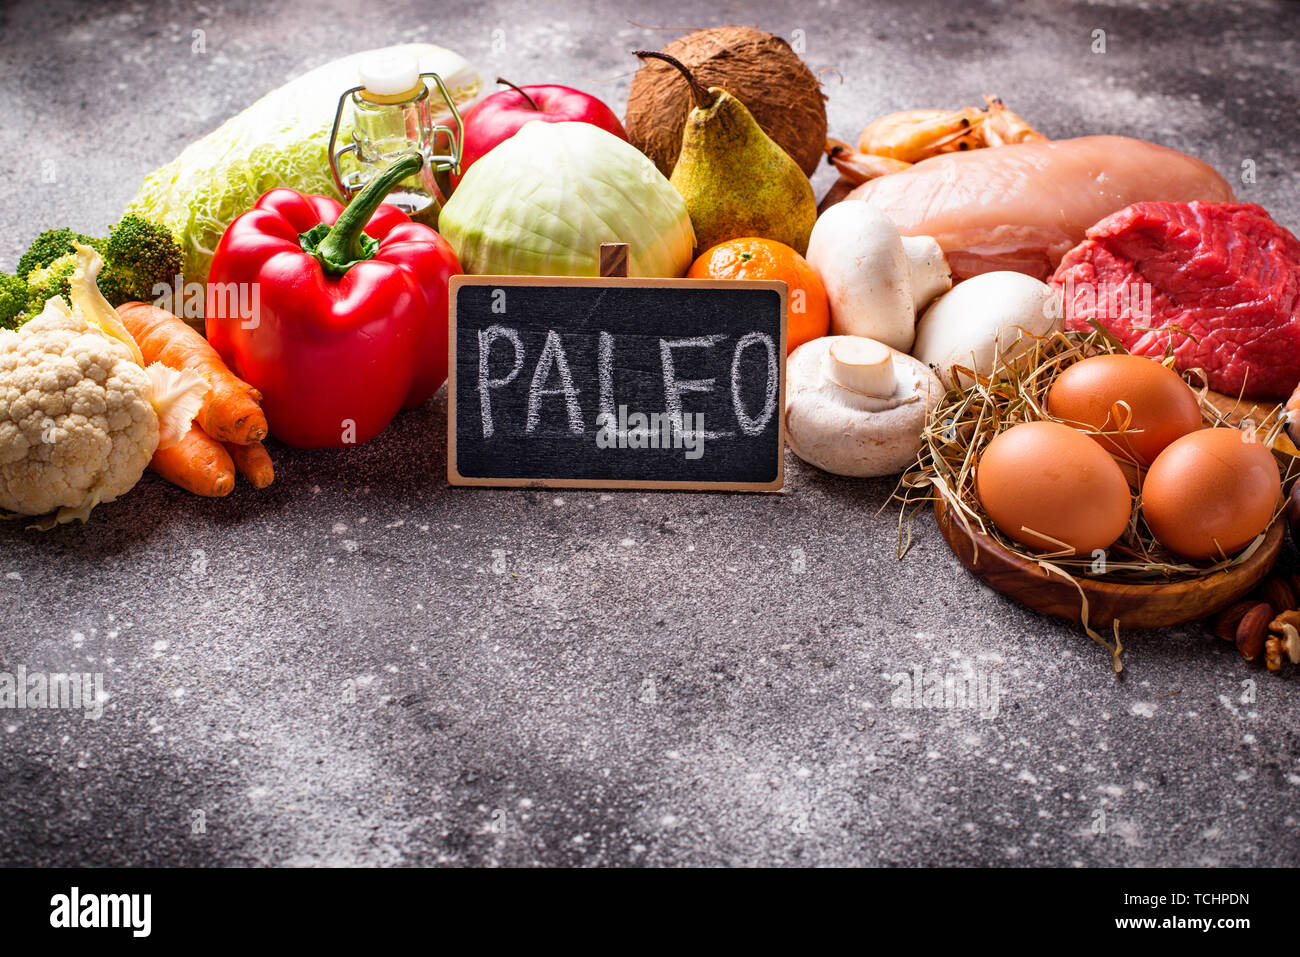 Paleo diet. Healthy high protein and low carbohydrate products Stock Photo